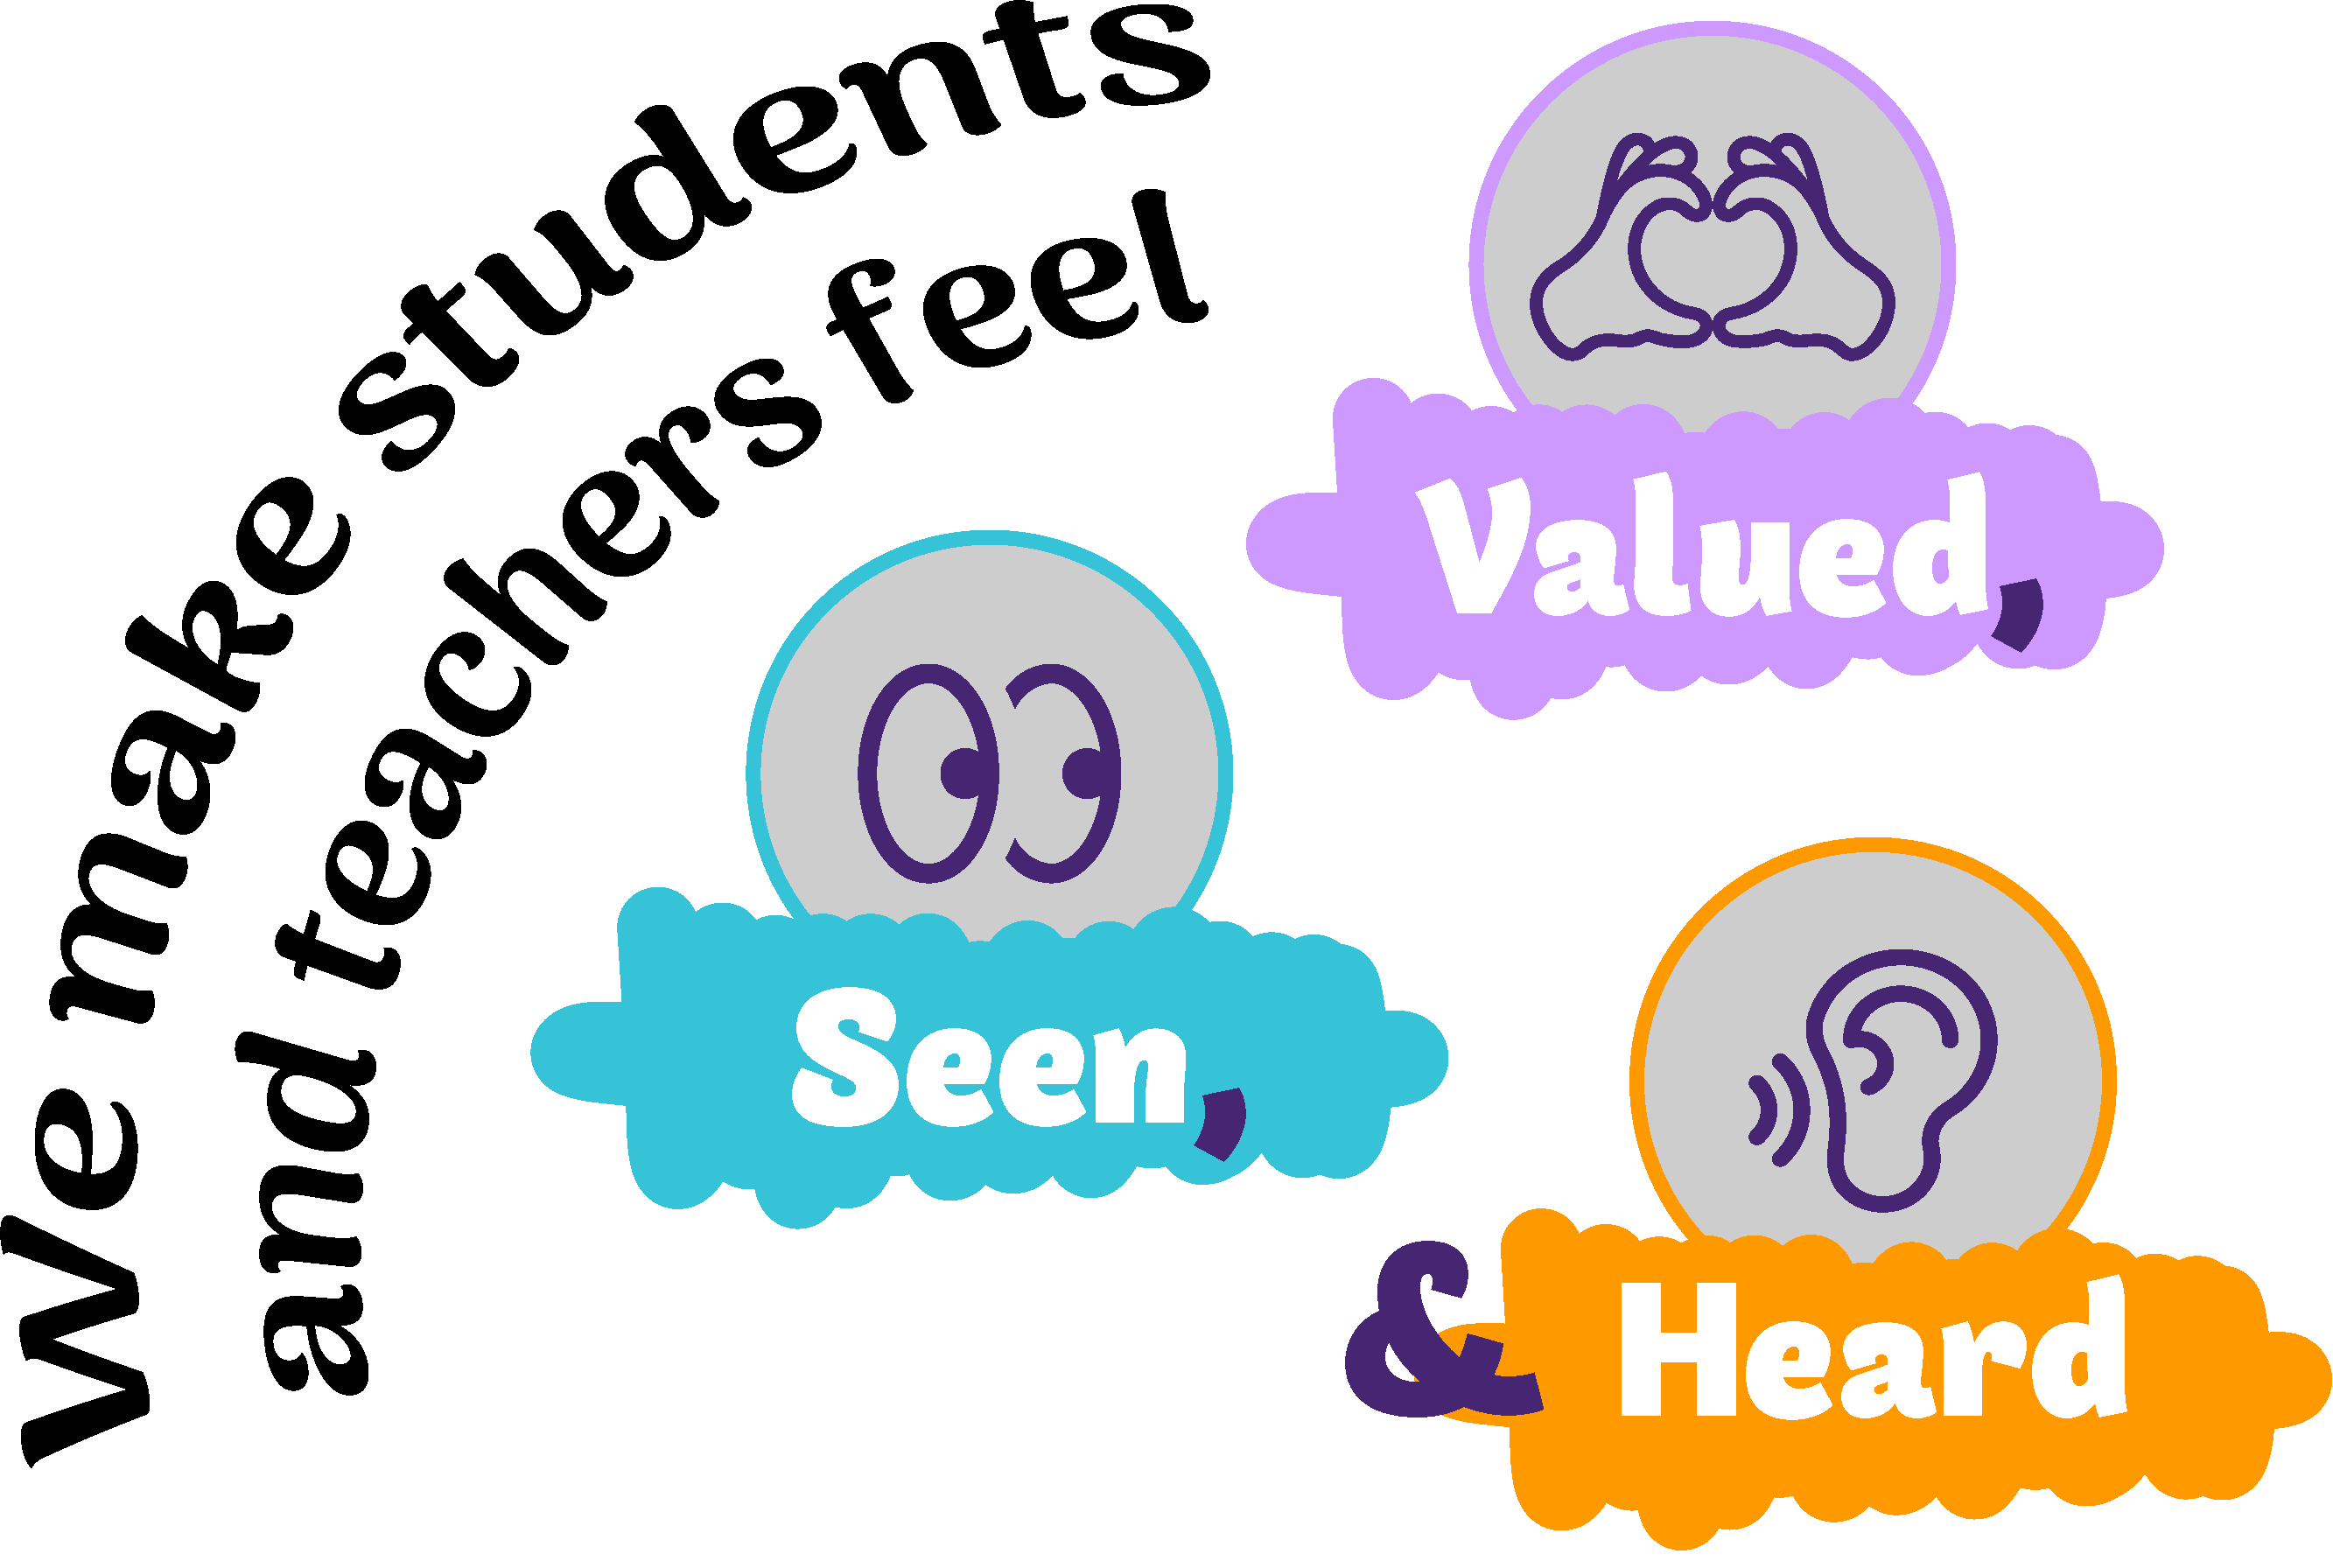 Valued, Seen, and Heard Infographic We make students and teachers feel valued, seen, and heard.